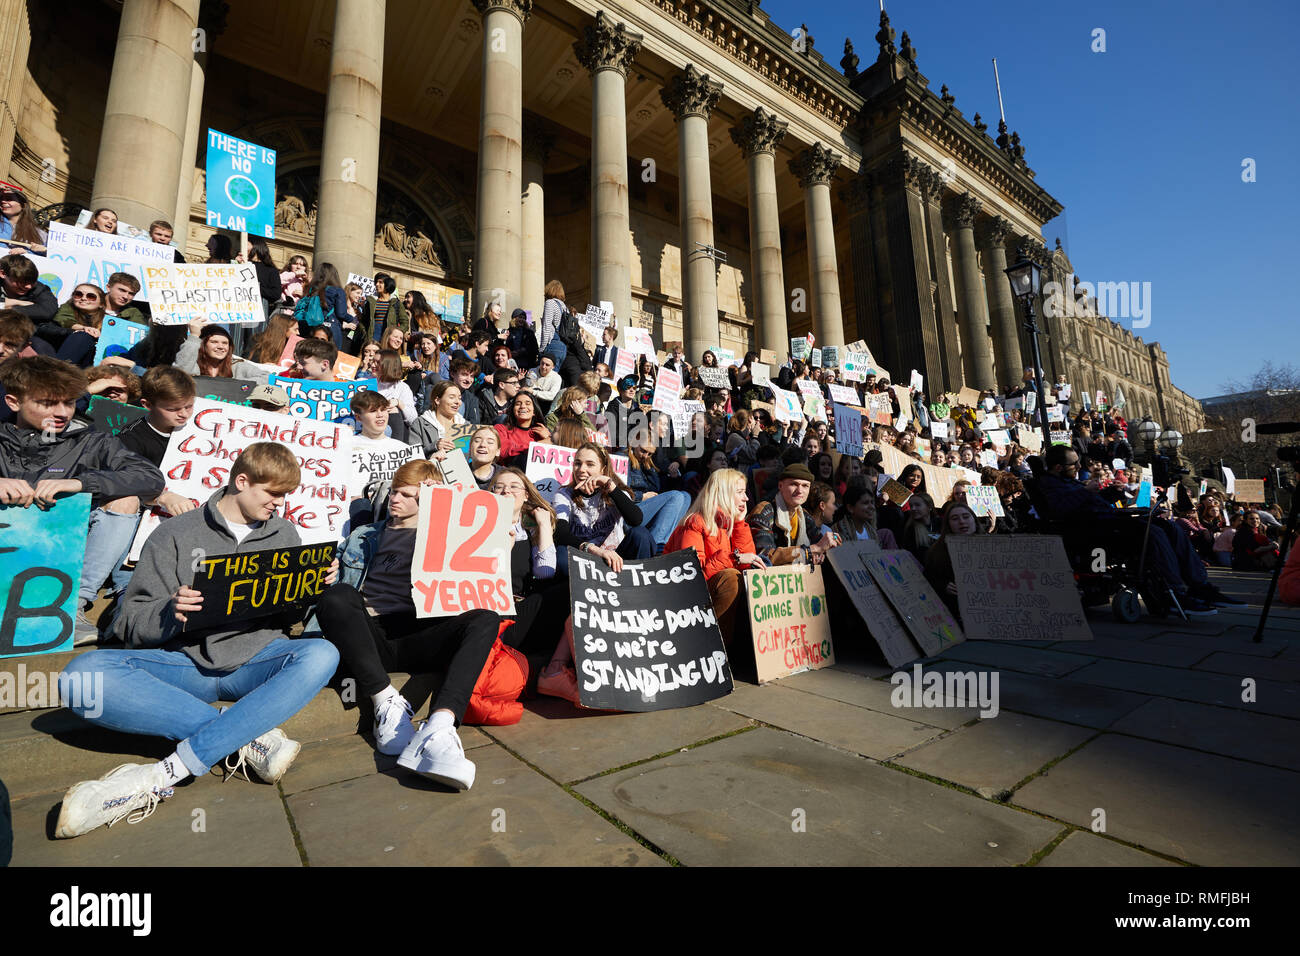 Leeds, UK. 15th Feb, 2019. Young people protesting outside Leeds City Hall during a national climate change strike day of action. Credit: Kevin J. Frost/Alamy Live News Stock Photo